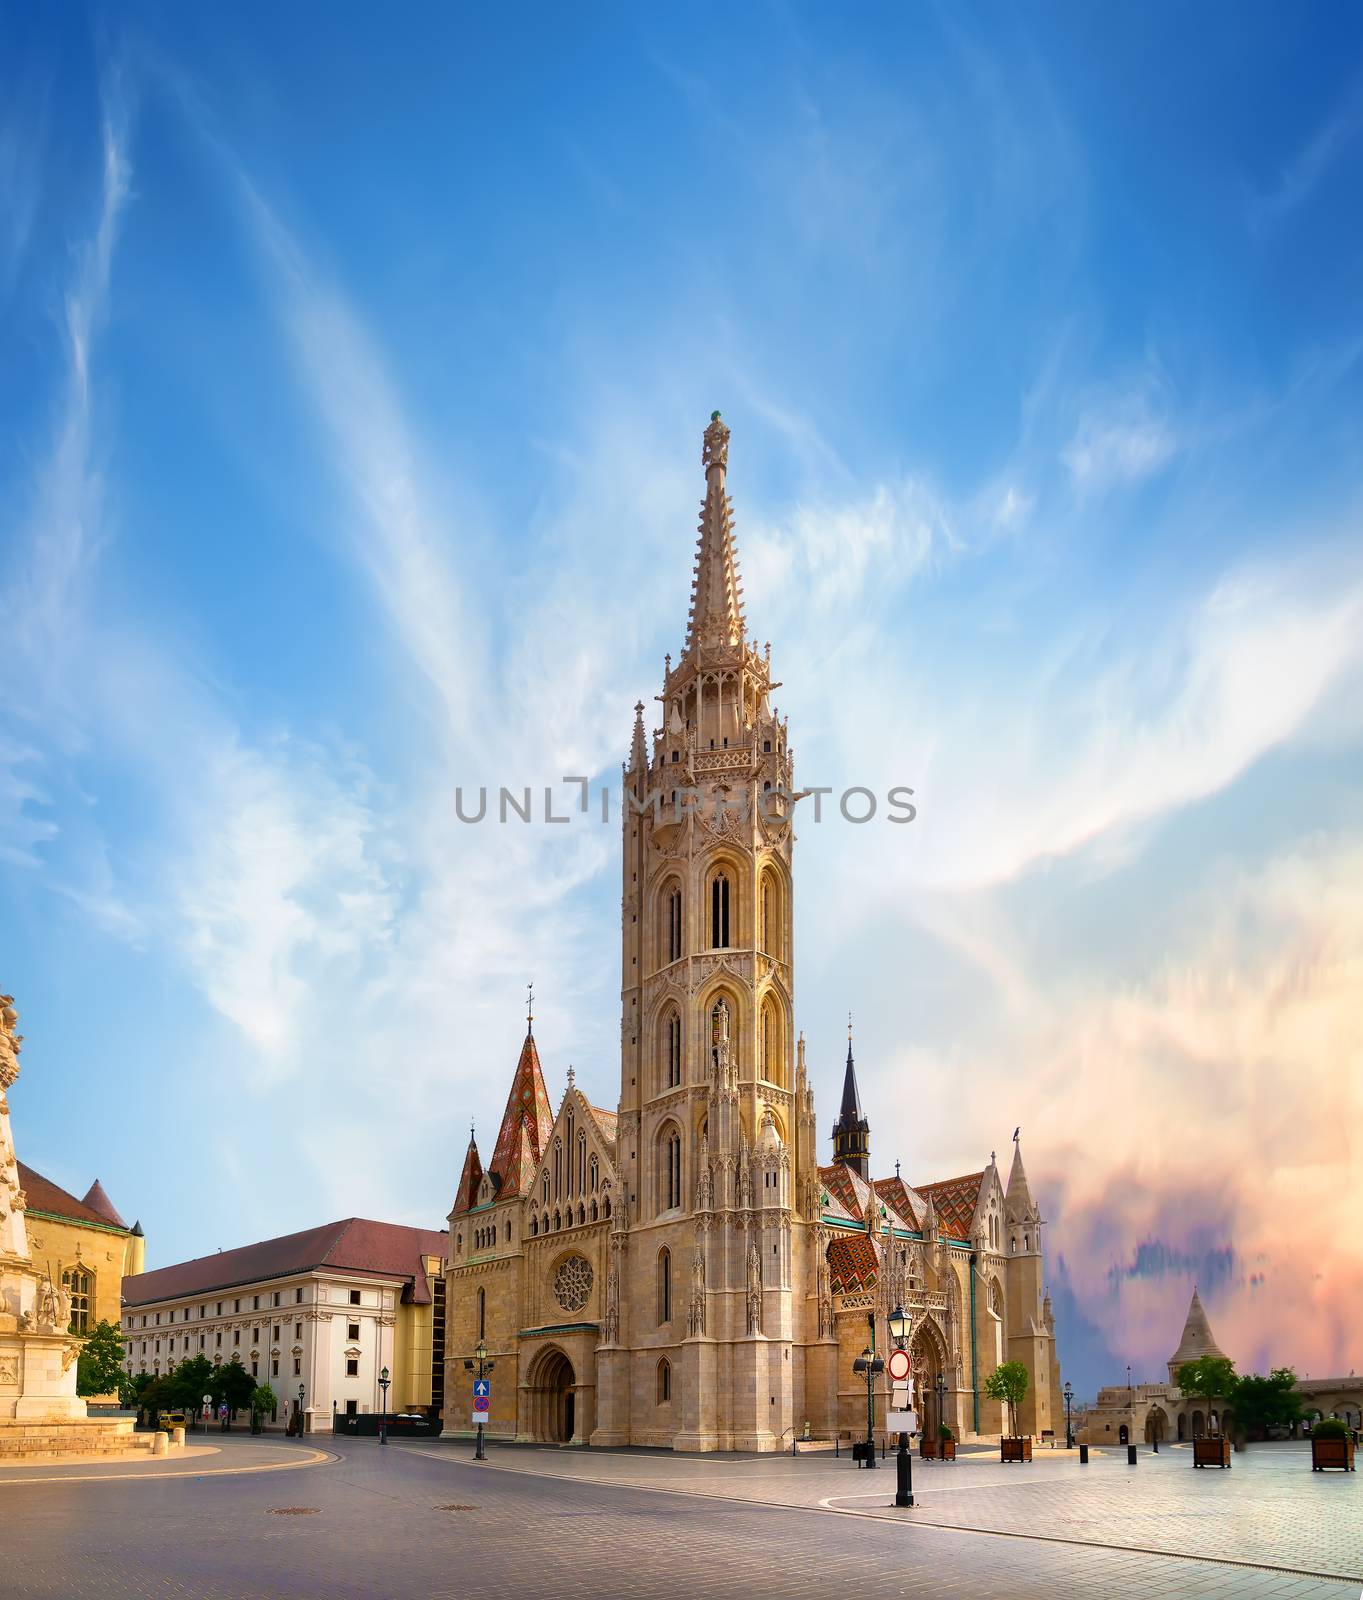 Matthias Church located in front of the Fisherman's Bastion in Budapest, Hungary